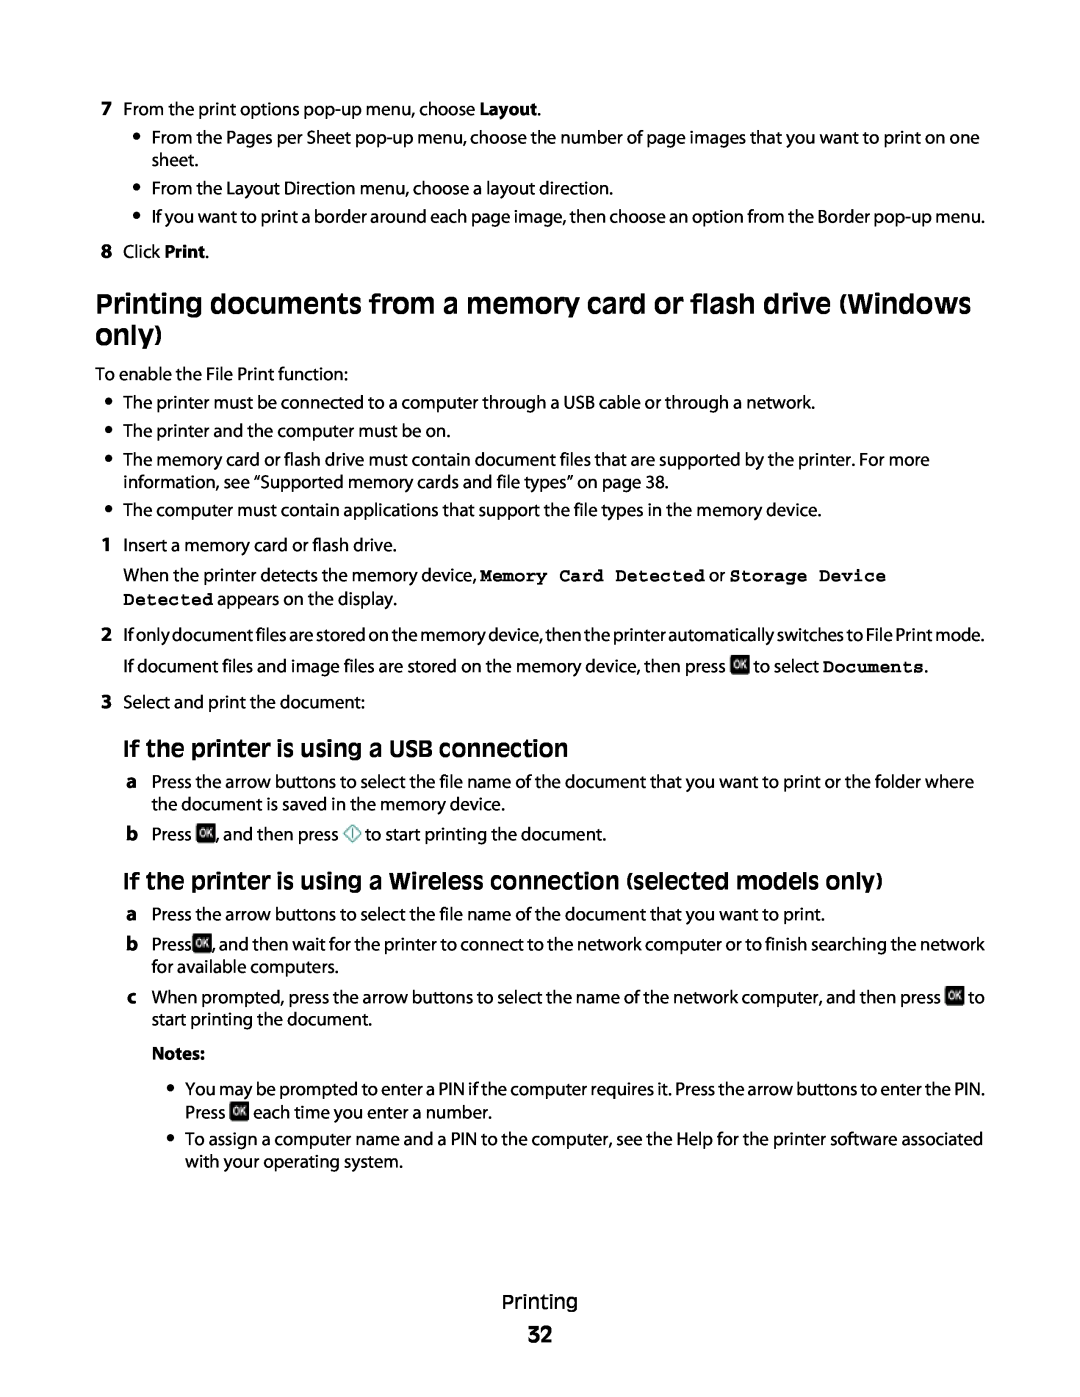 Lexmark 101, 10E manual If the printer is using a USB connection, Notes 